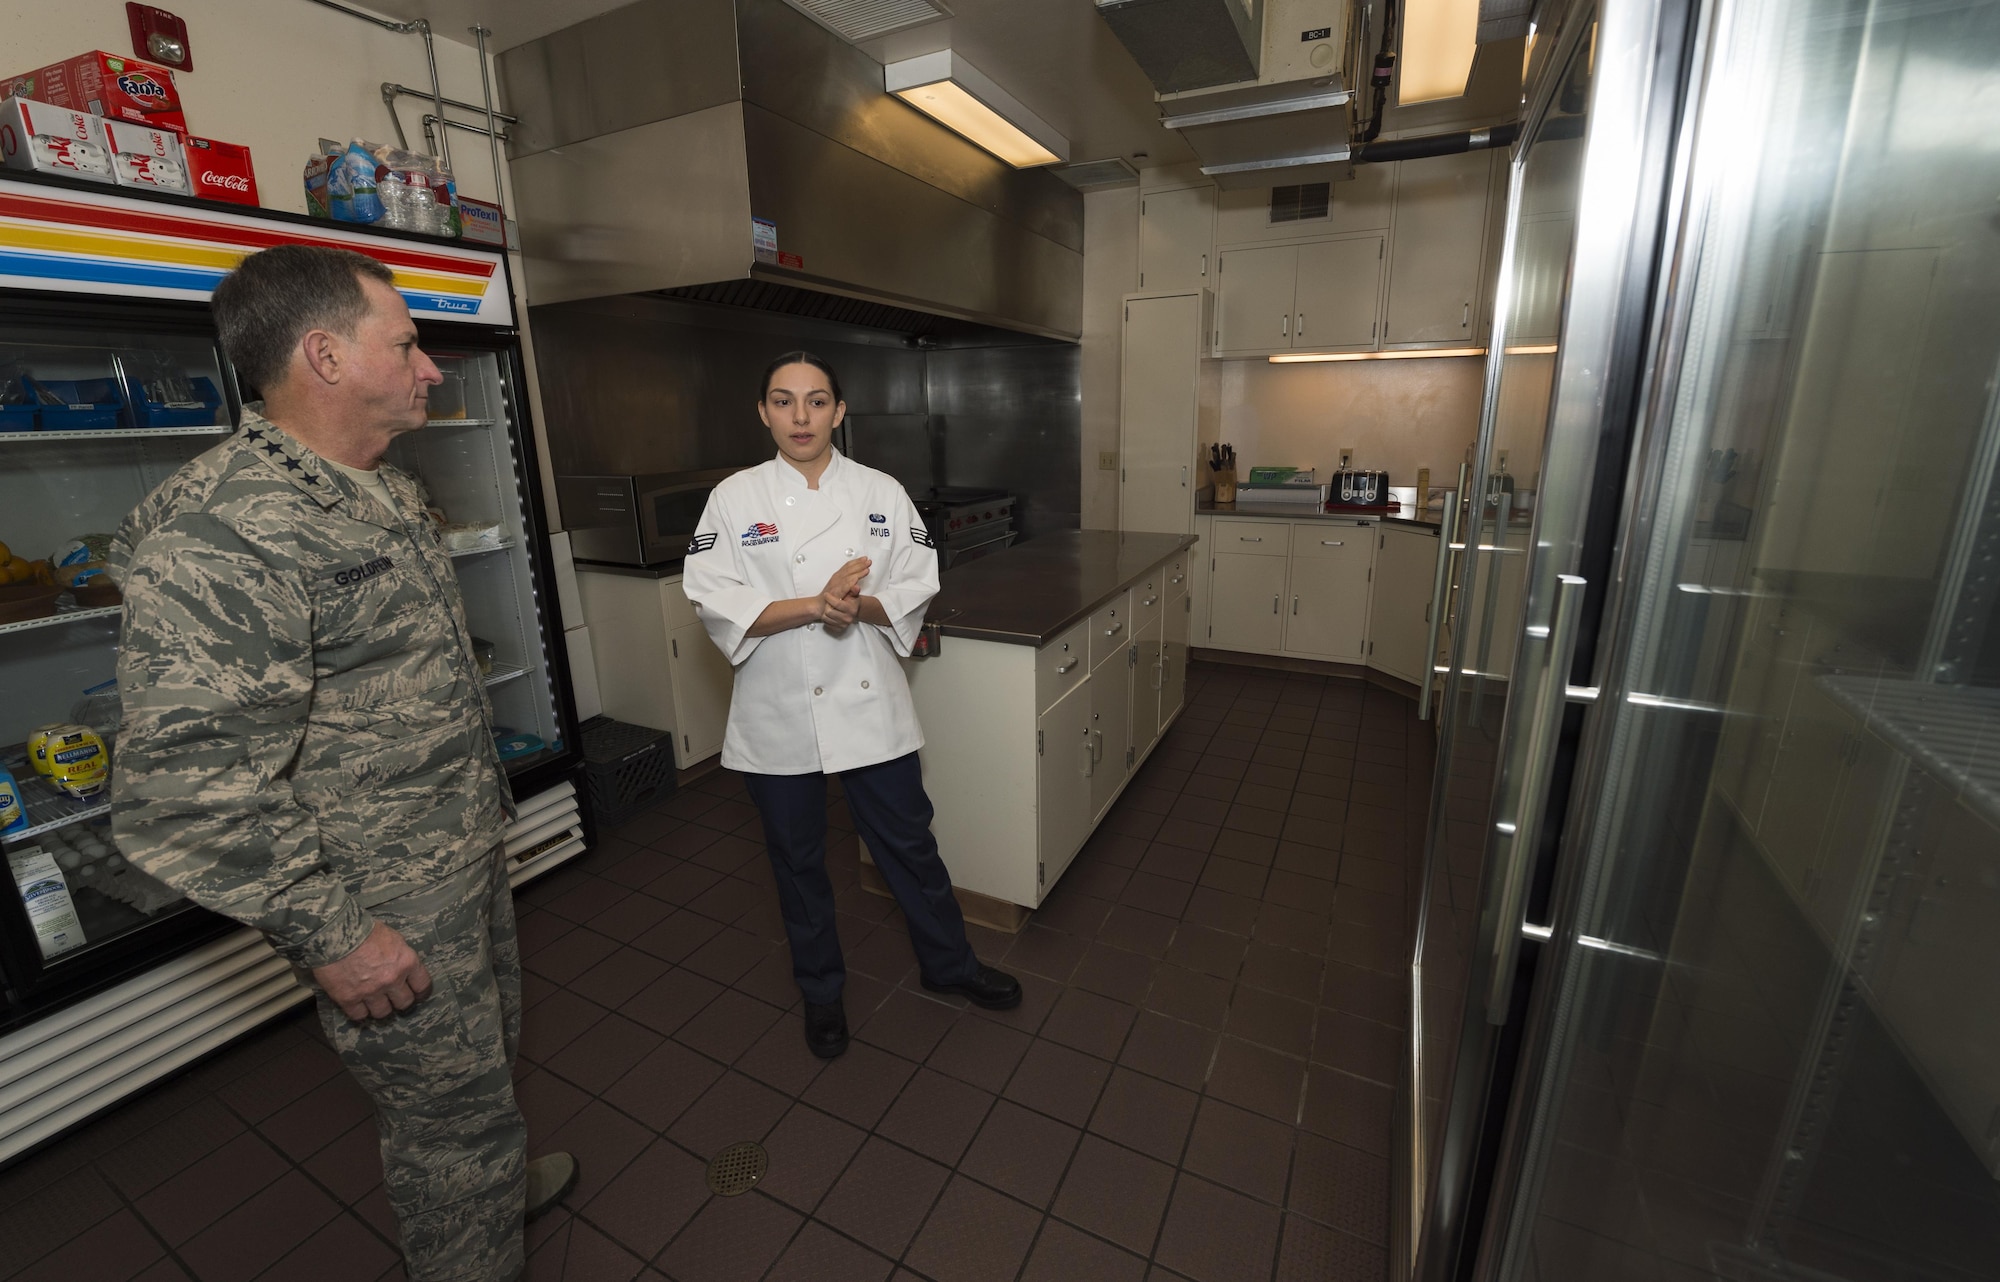 Senior Airman Alexandra Ayub, 90th Force Support Squadron missile chef, explains her job to Air Force Chief of Staff Gen. David L. Goldfein during a familiarization tour at a missile alert facility in the 90th Missile Wing missile complex, Dec. 19, 2016. Ayub is responsible for cooking for all personnel at the missile alert facility. (U.S. Air Force photo by Staff Sgt. Christopher Ruano)